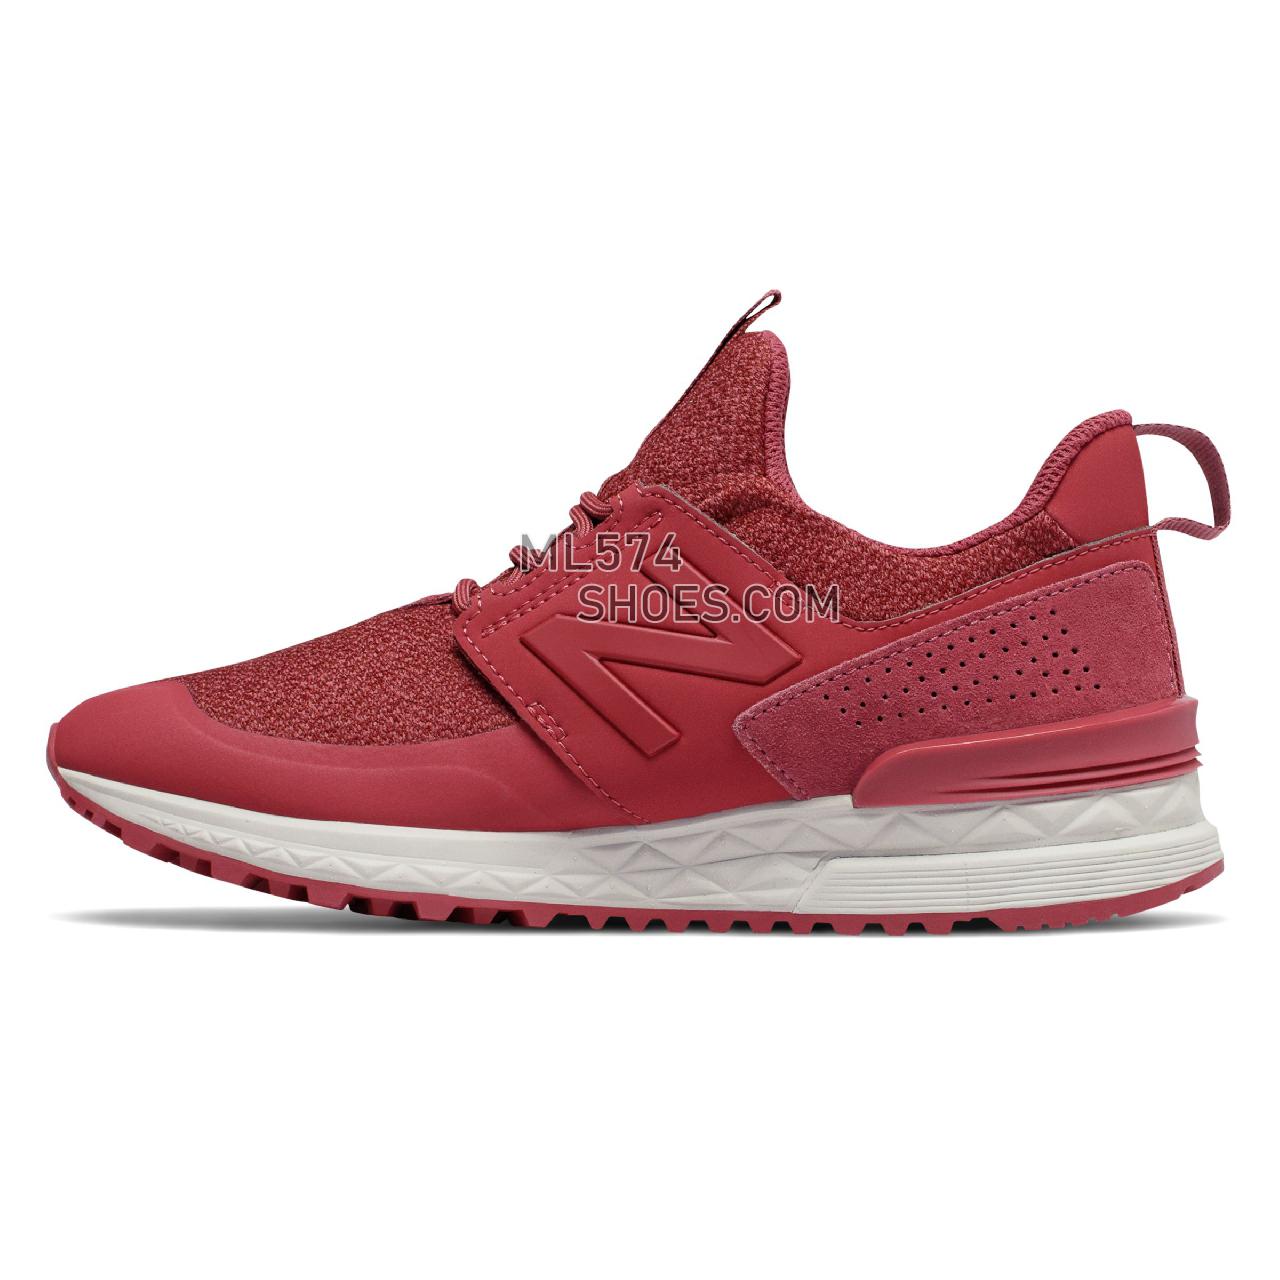 New Balance 574 Sport - Women's 574 - Classic Earth Red - WS574DTG